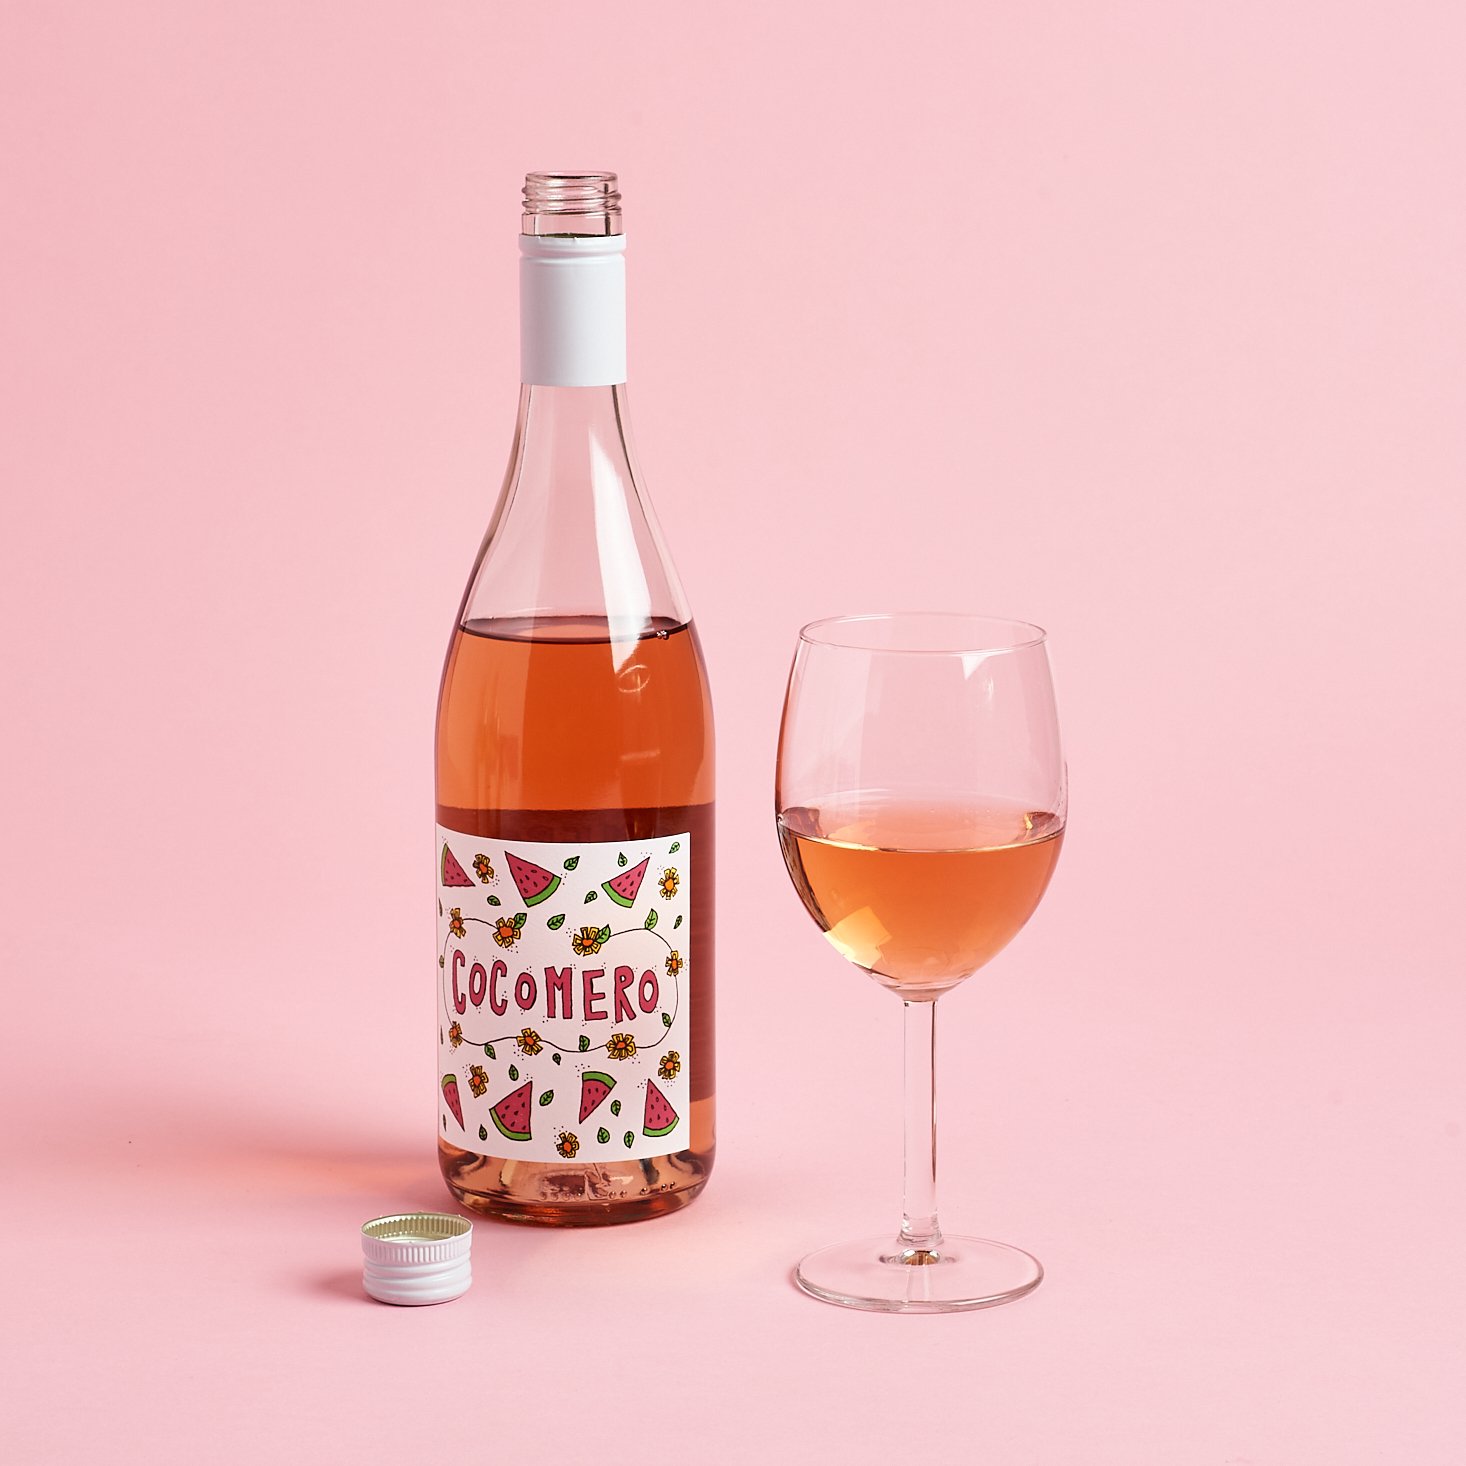 2018 cocomero rose bottle and poured glass